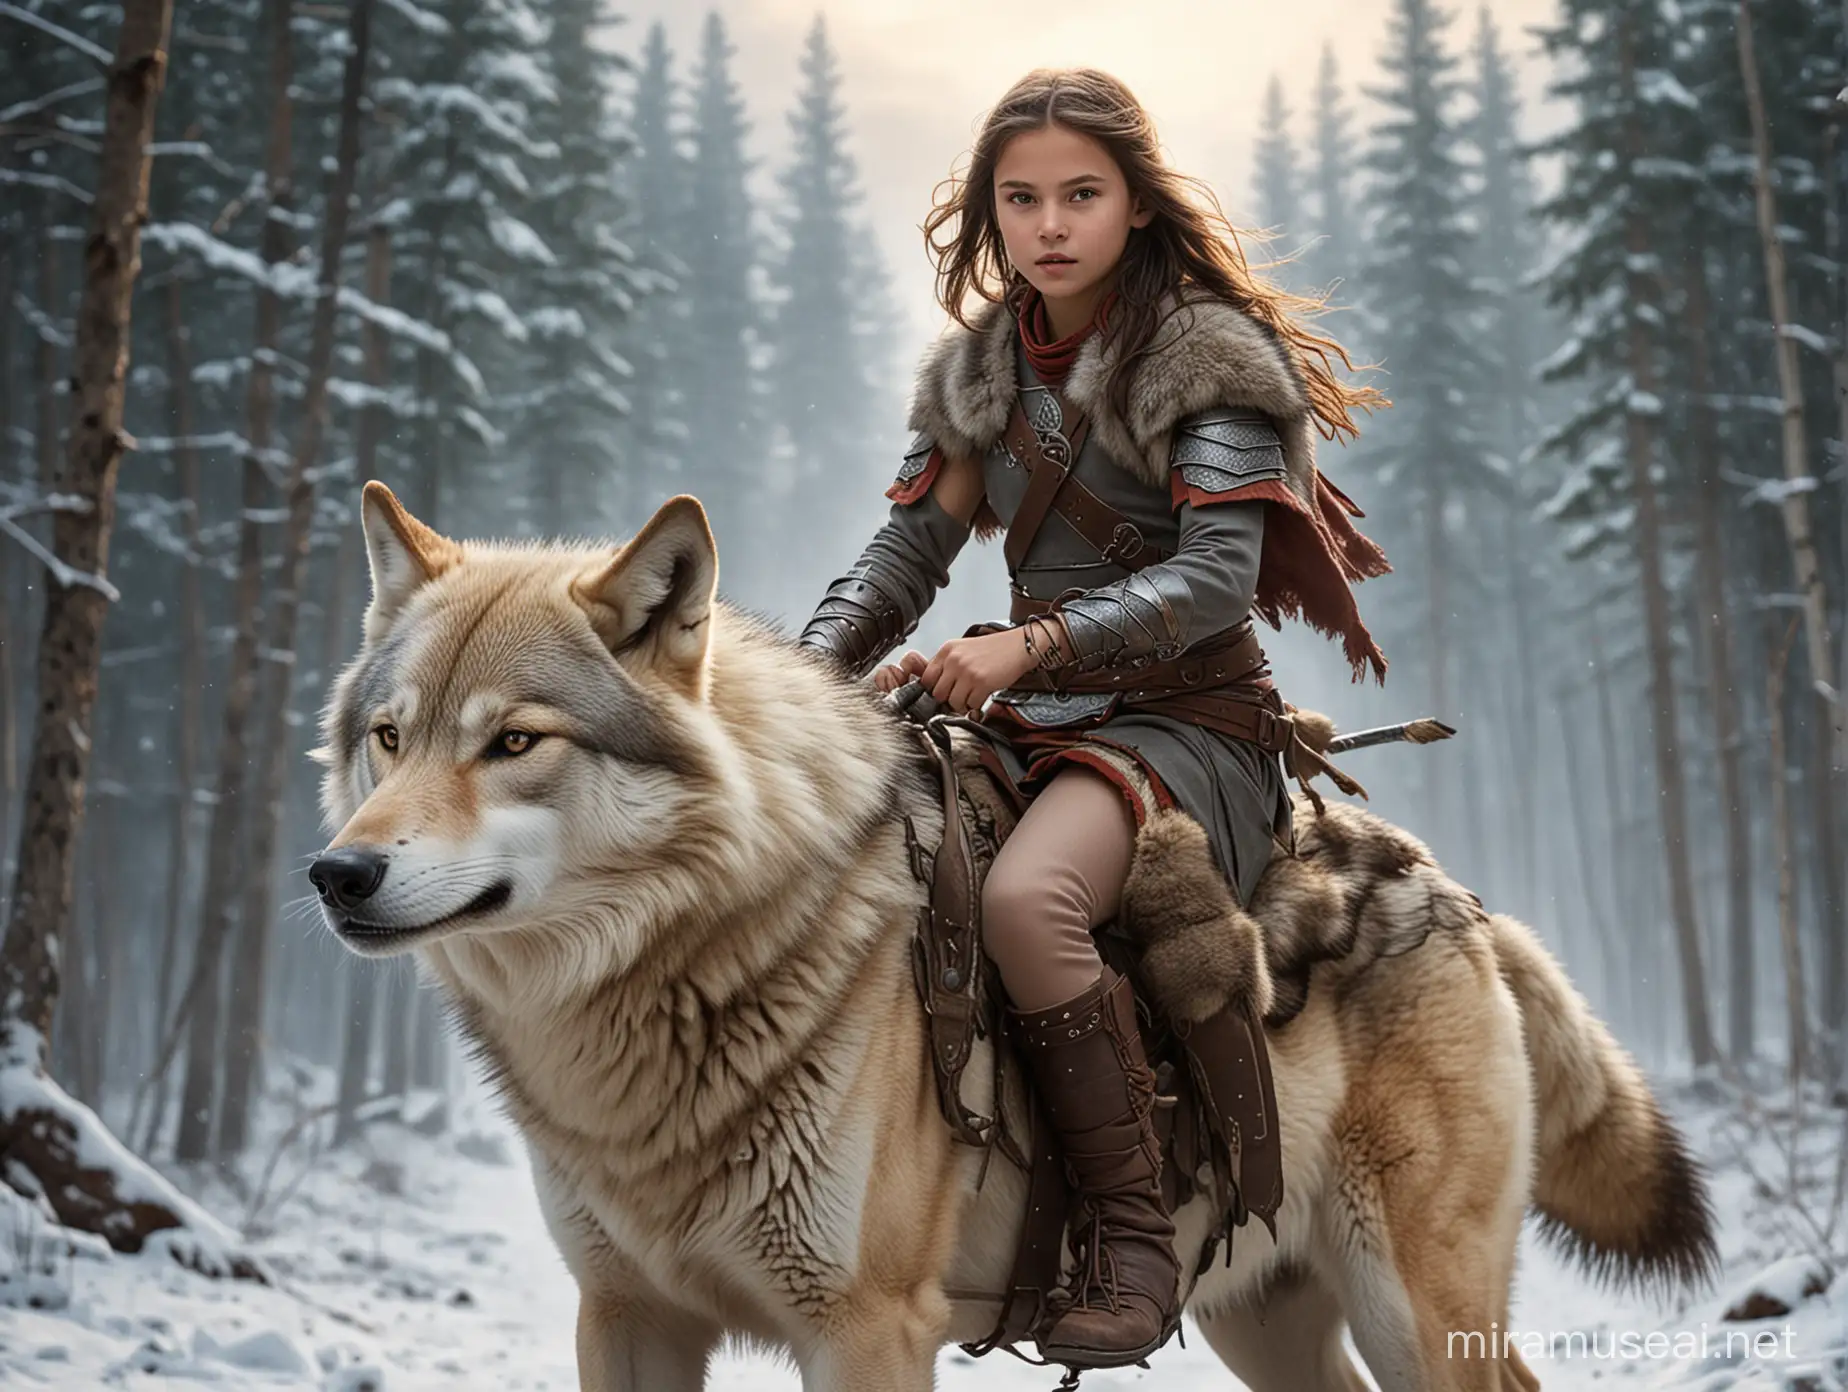 young girl warrior riding on the back of a wolf
